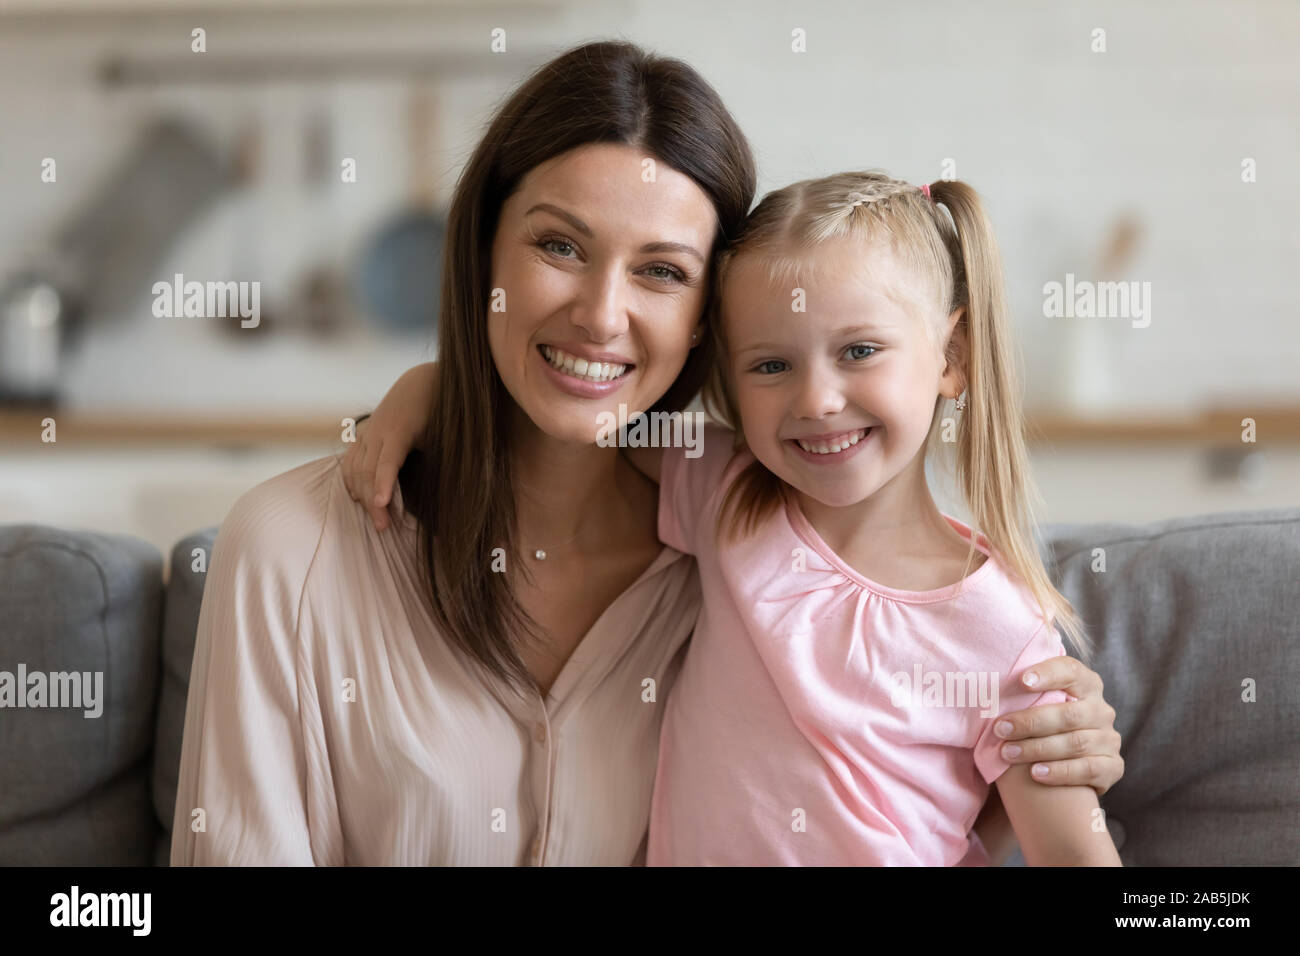 Affectionate single mom and child daughter embracing looking at camera Stock Photo